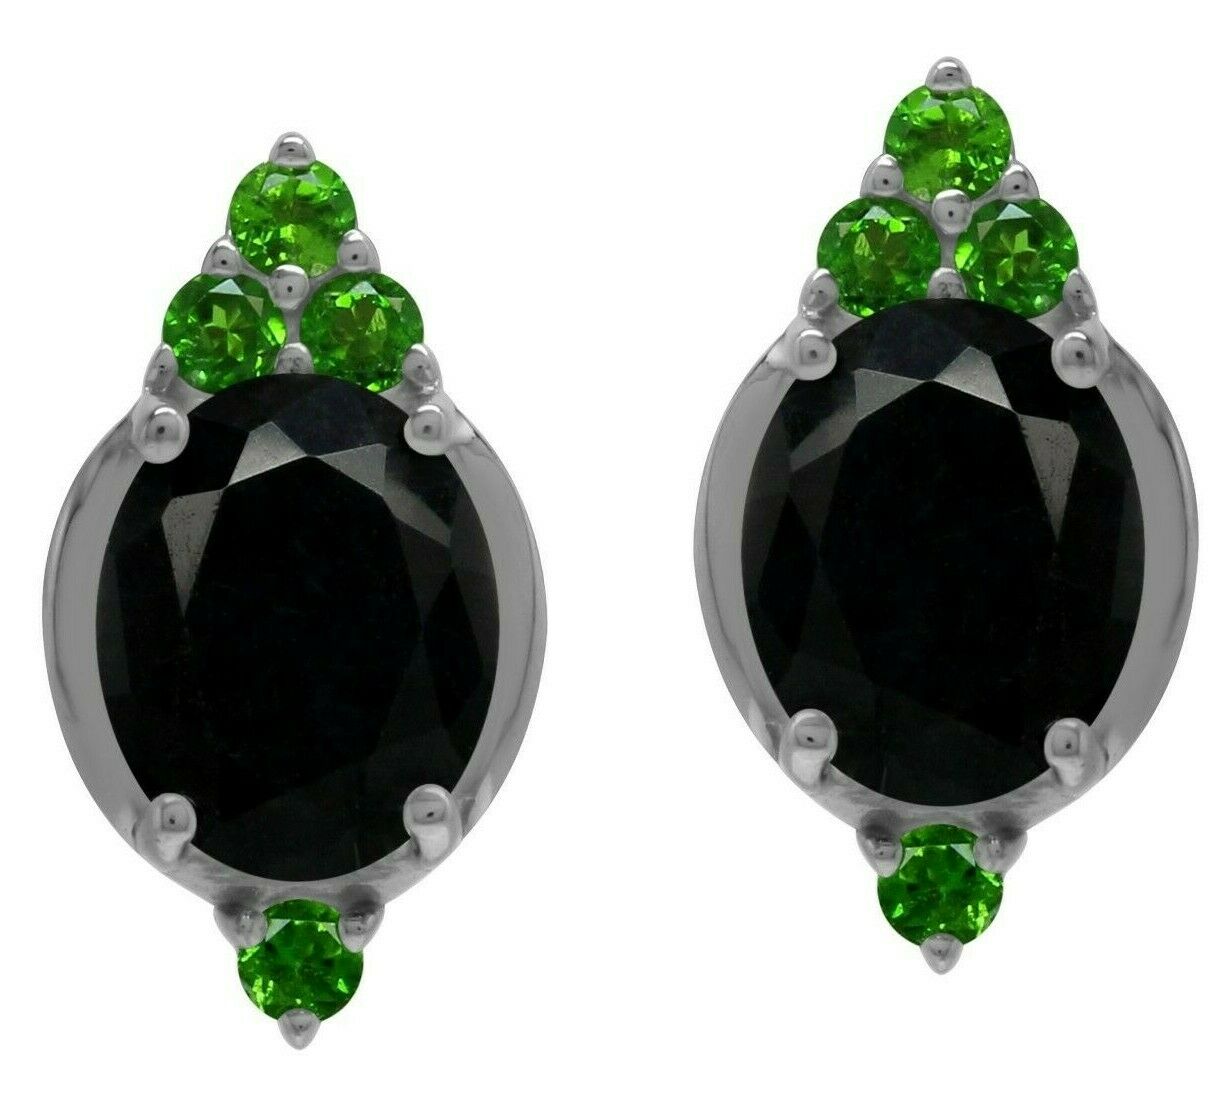 Antique Style Genuine Black Sapphire & Chrome Diopside 925 Silver Stud Earrings